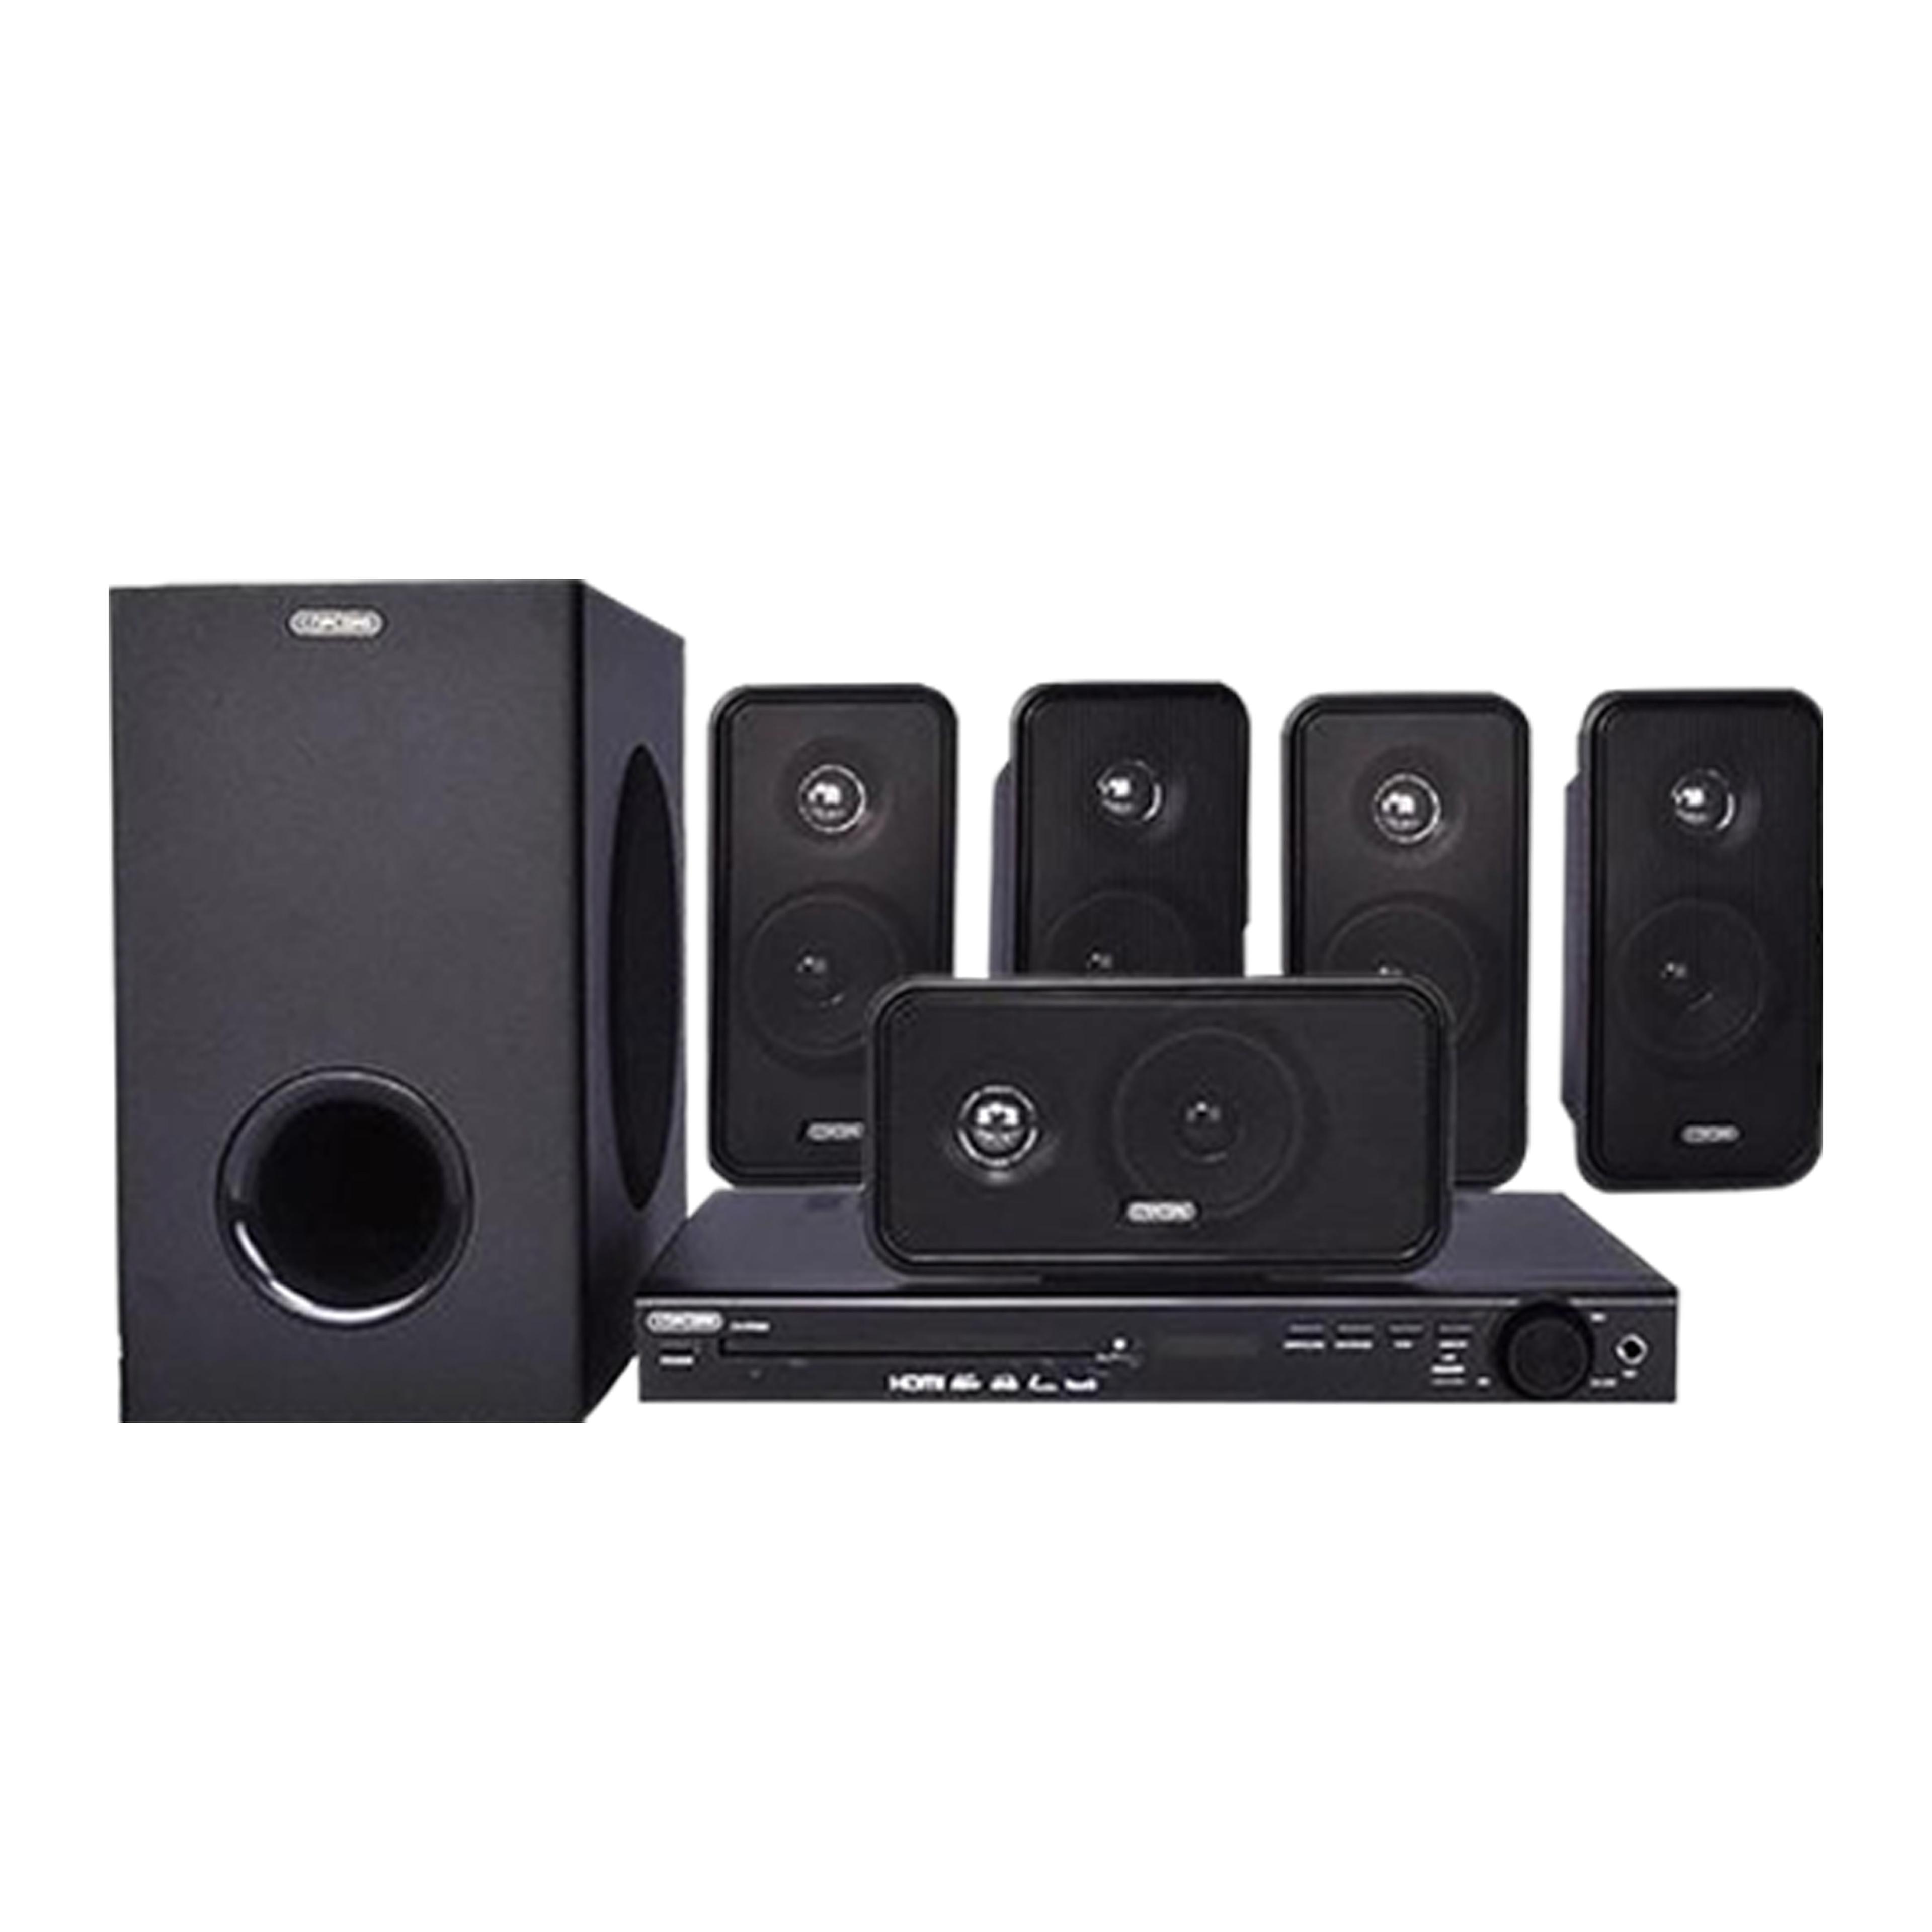 Concord Home Theater System - Model 514